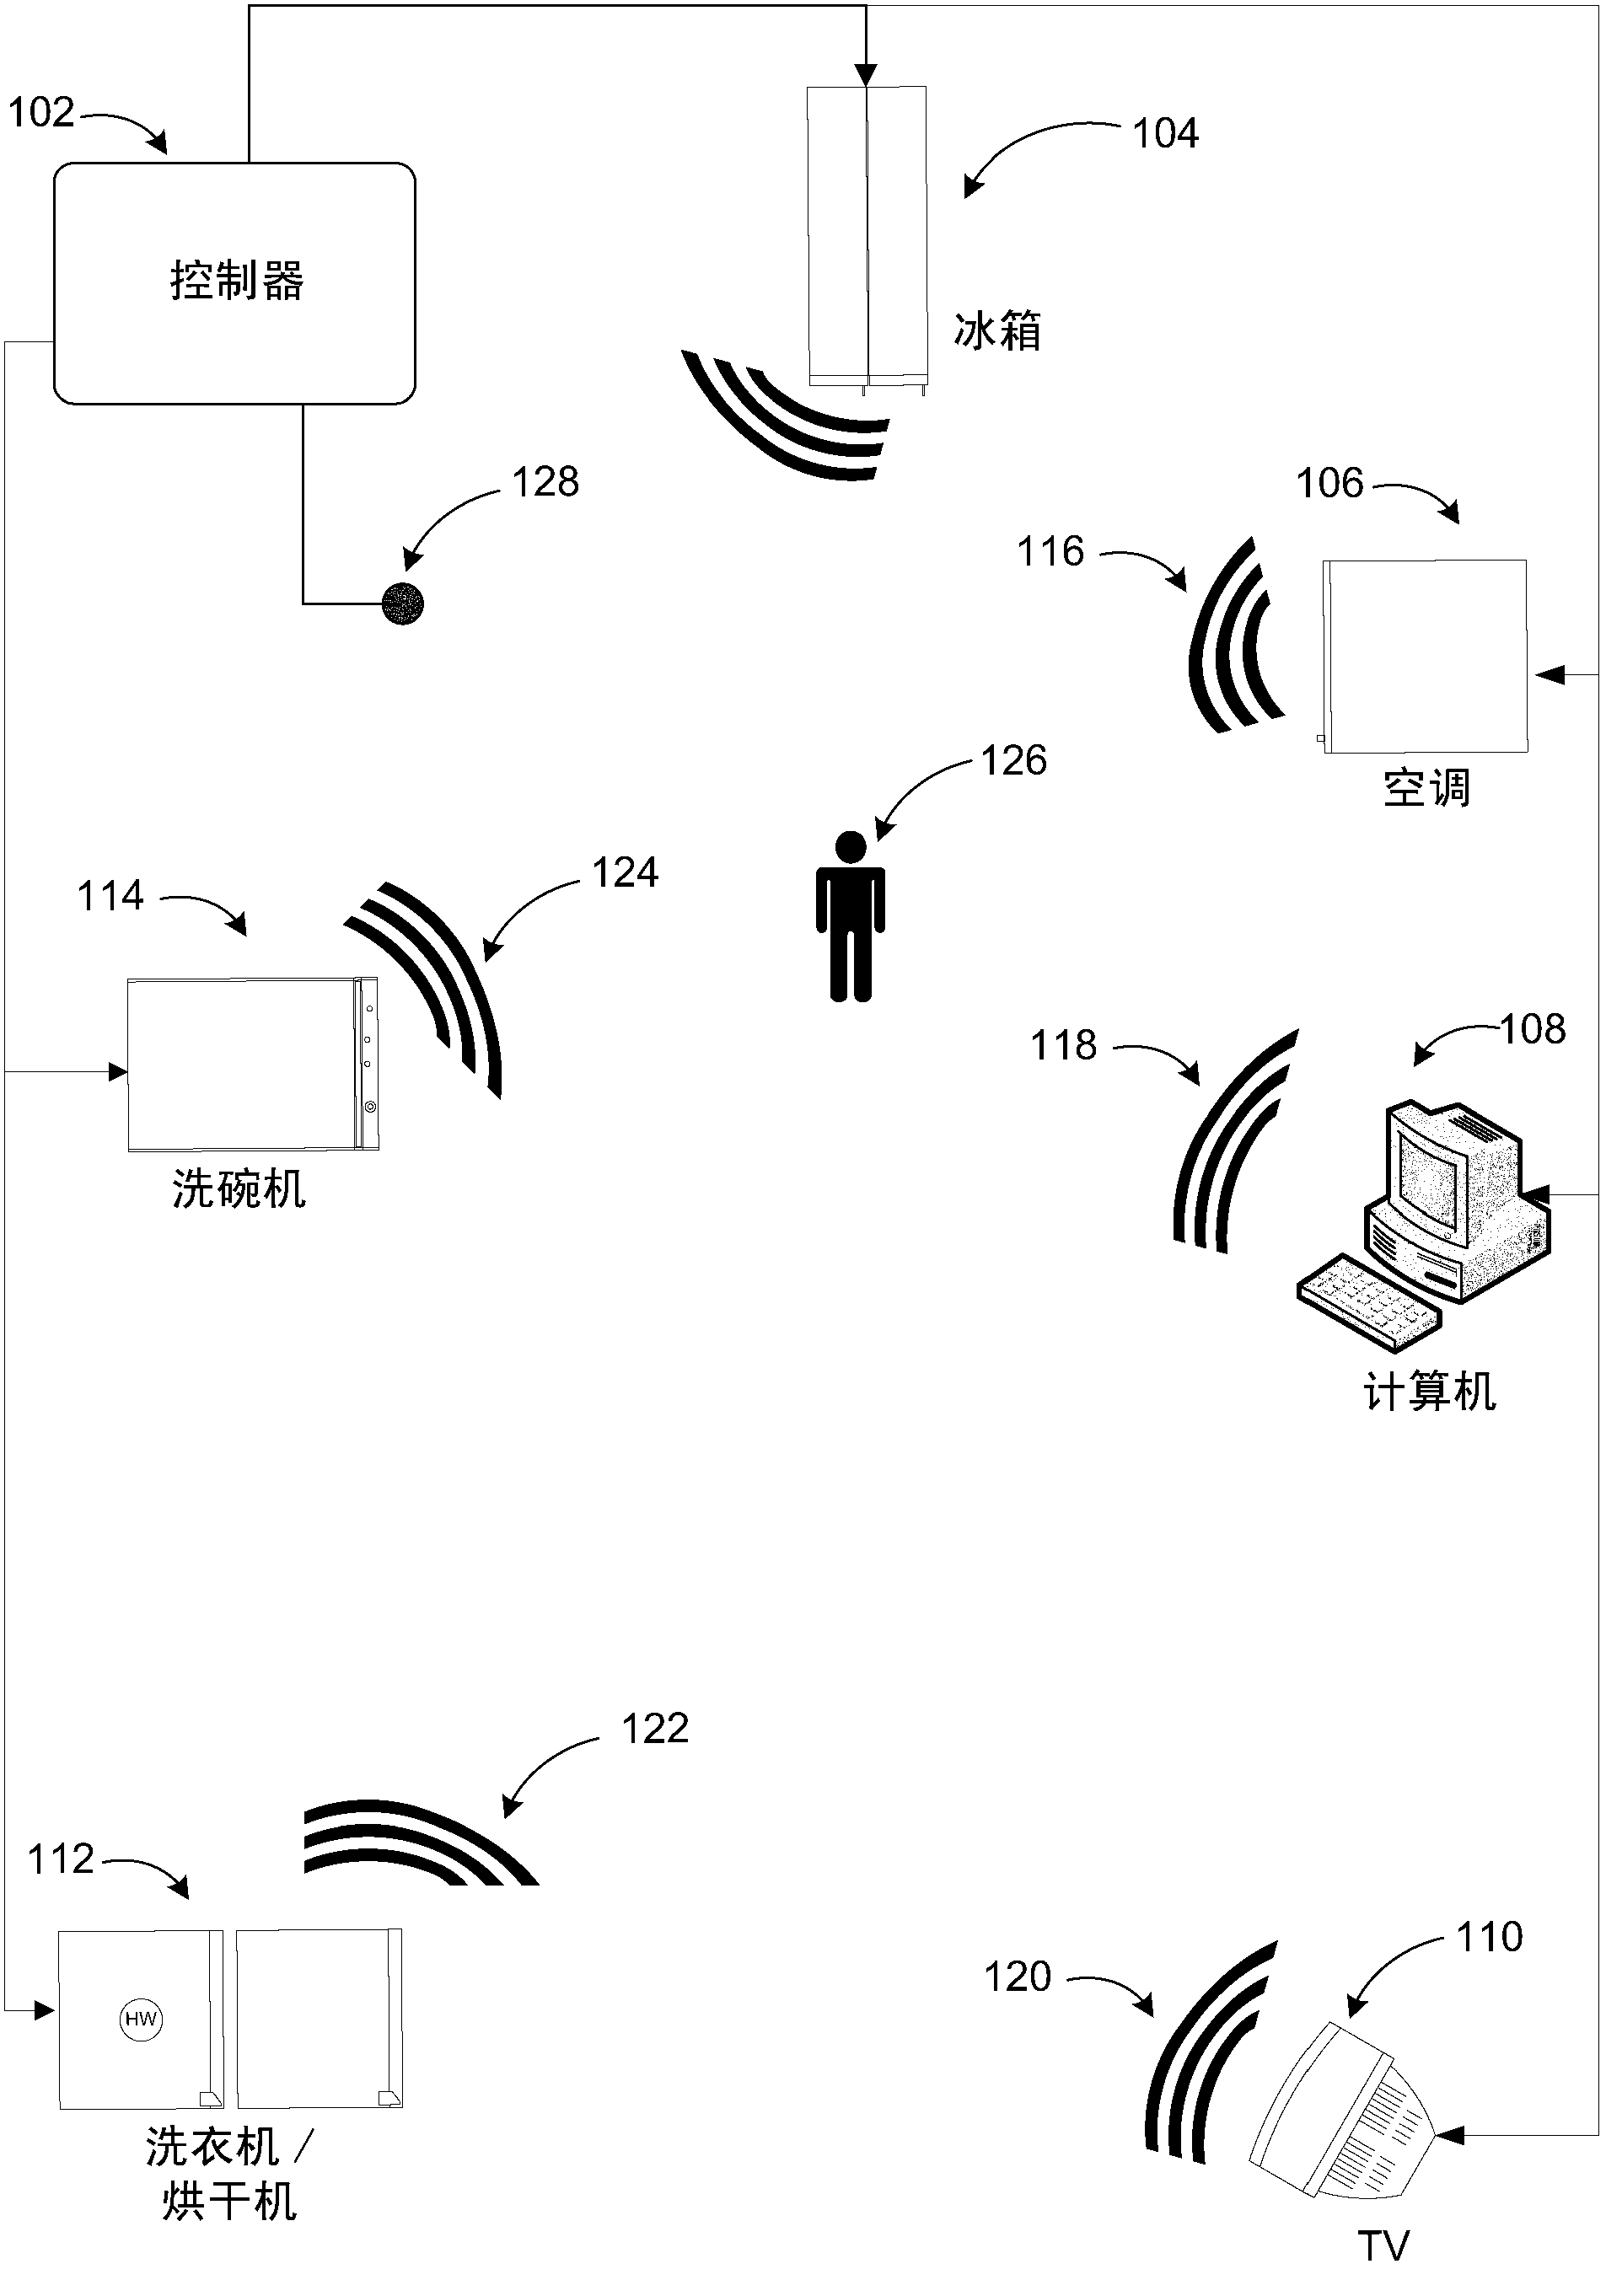 Acoustic noise management through control of electrical device operations